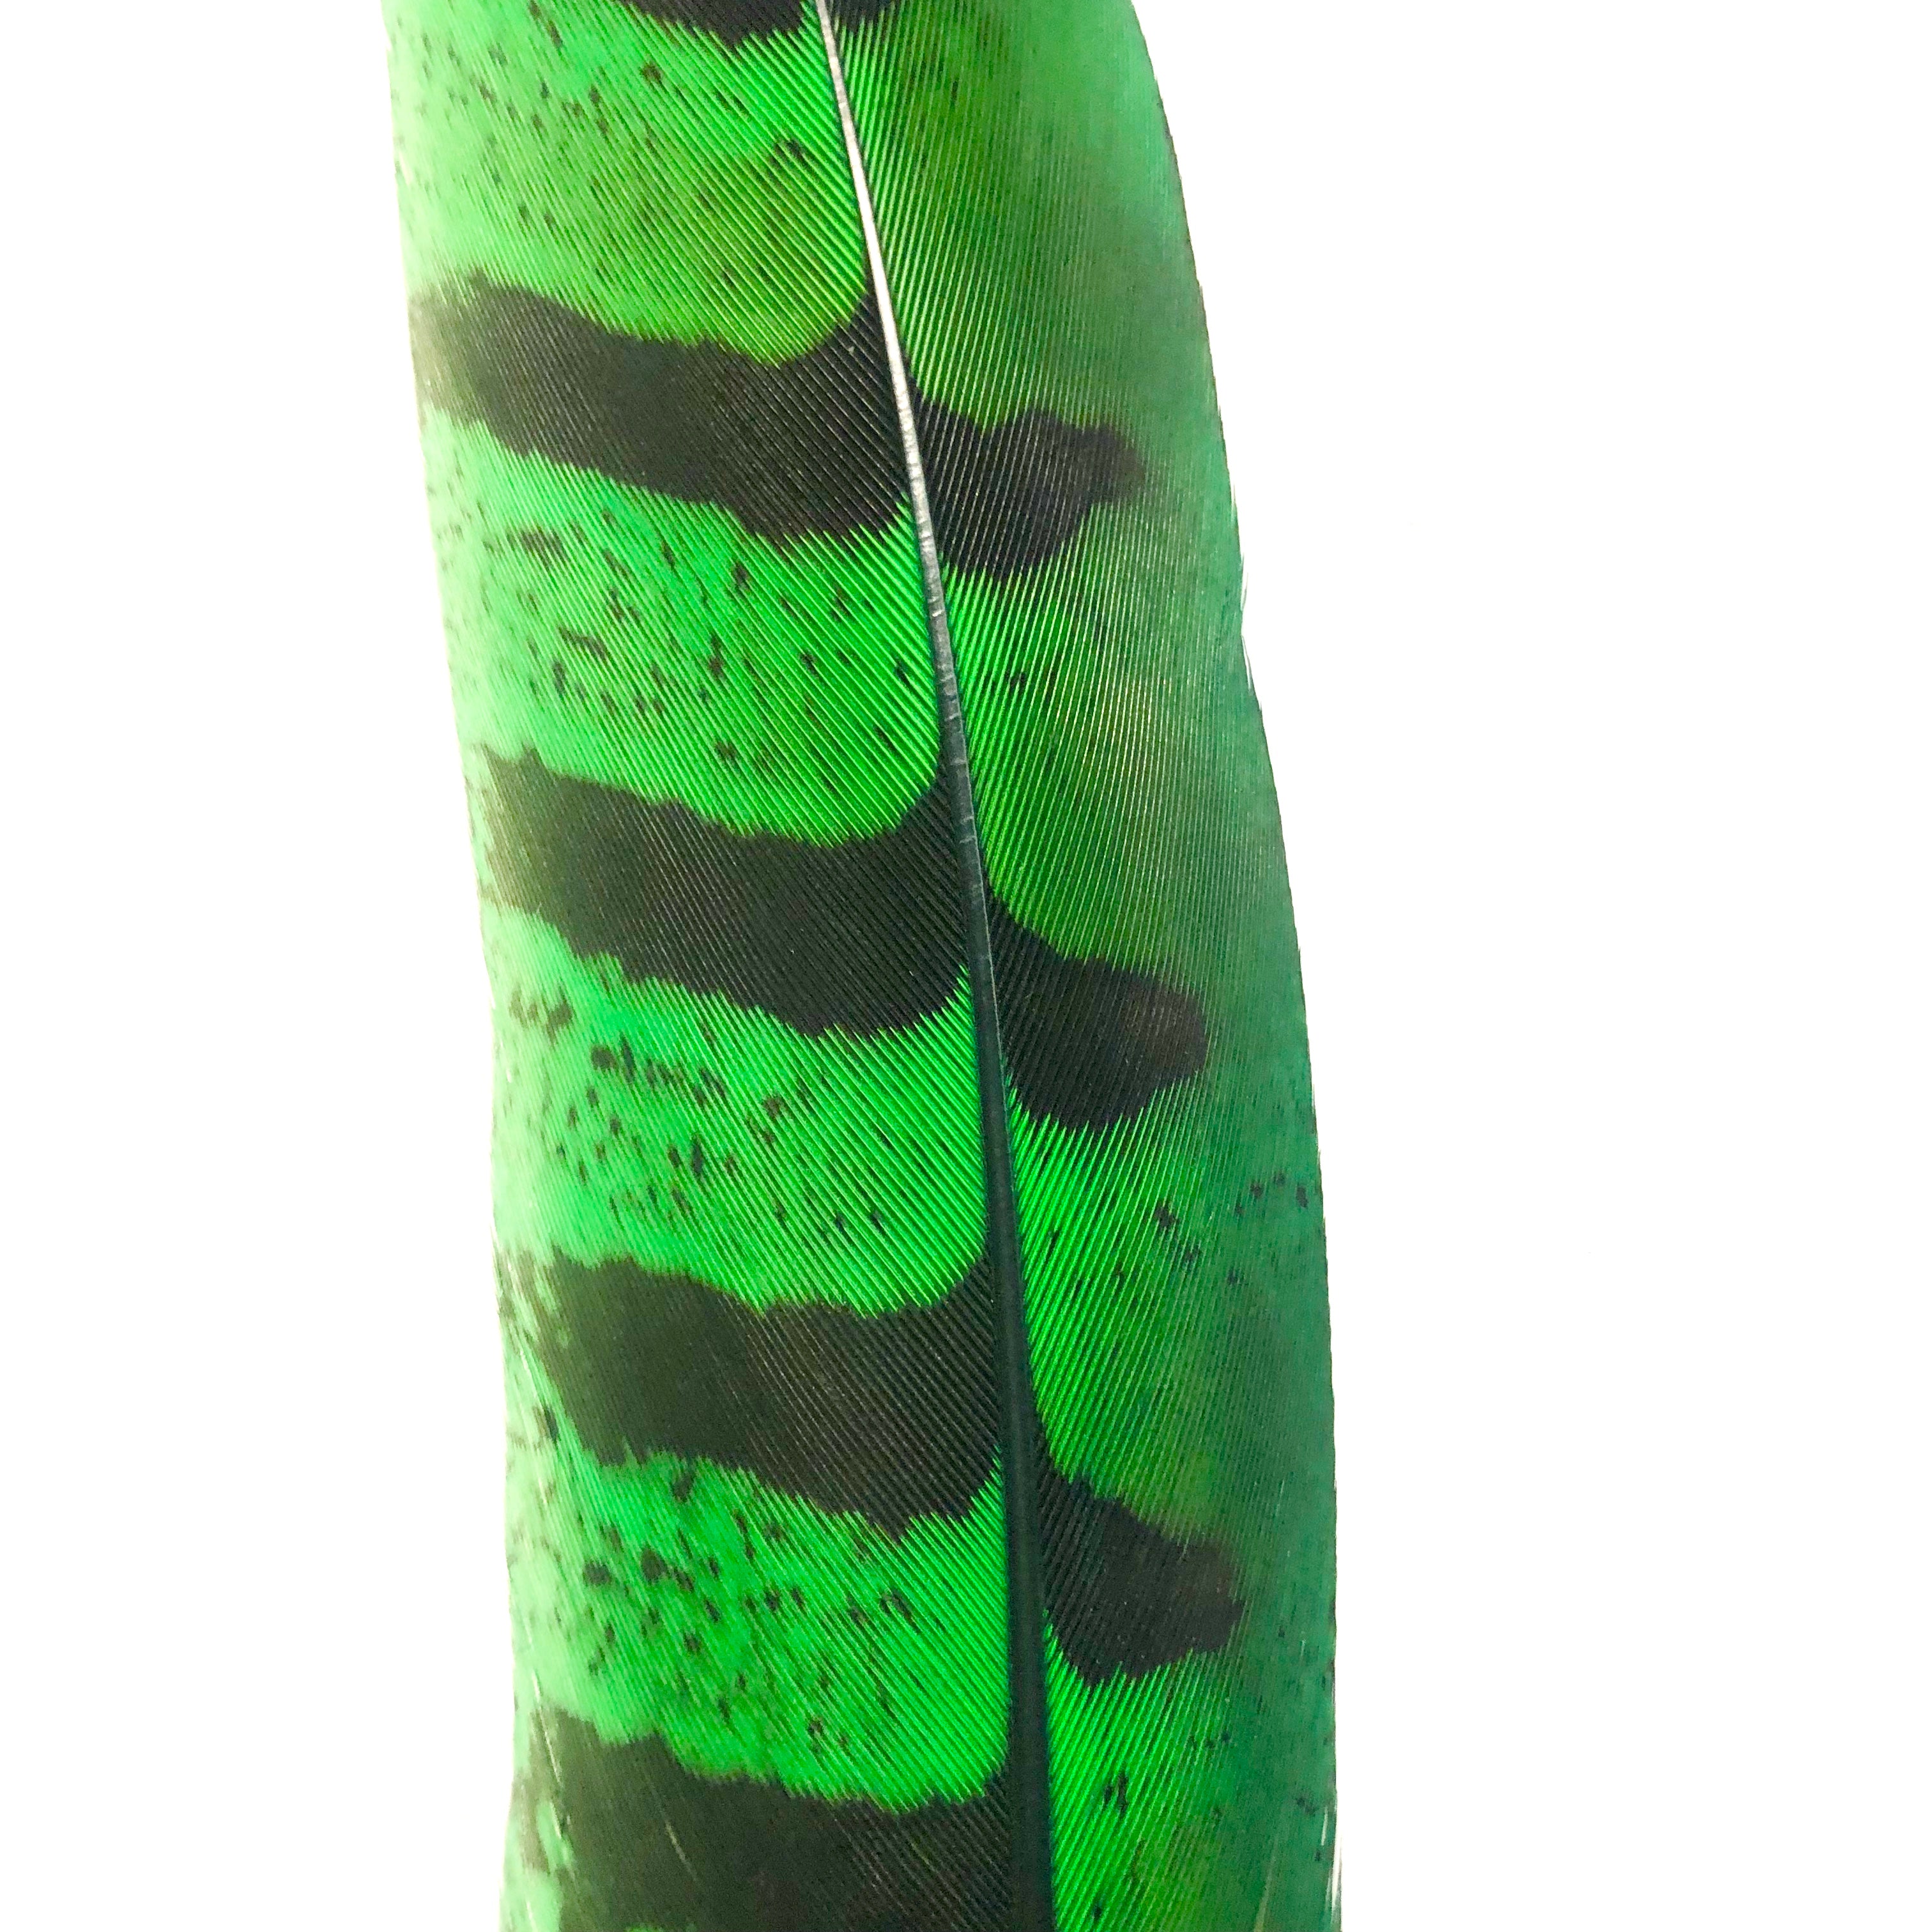 8" to 10" Reeves Pheasant Tail Feather - Green